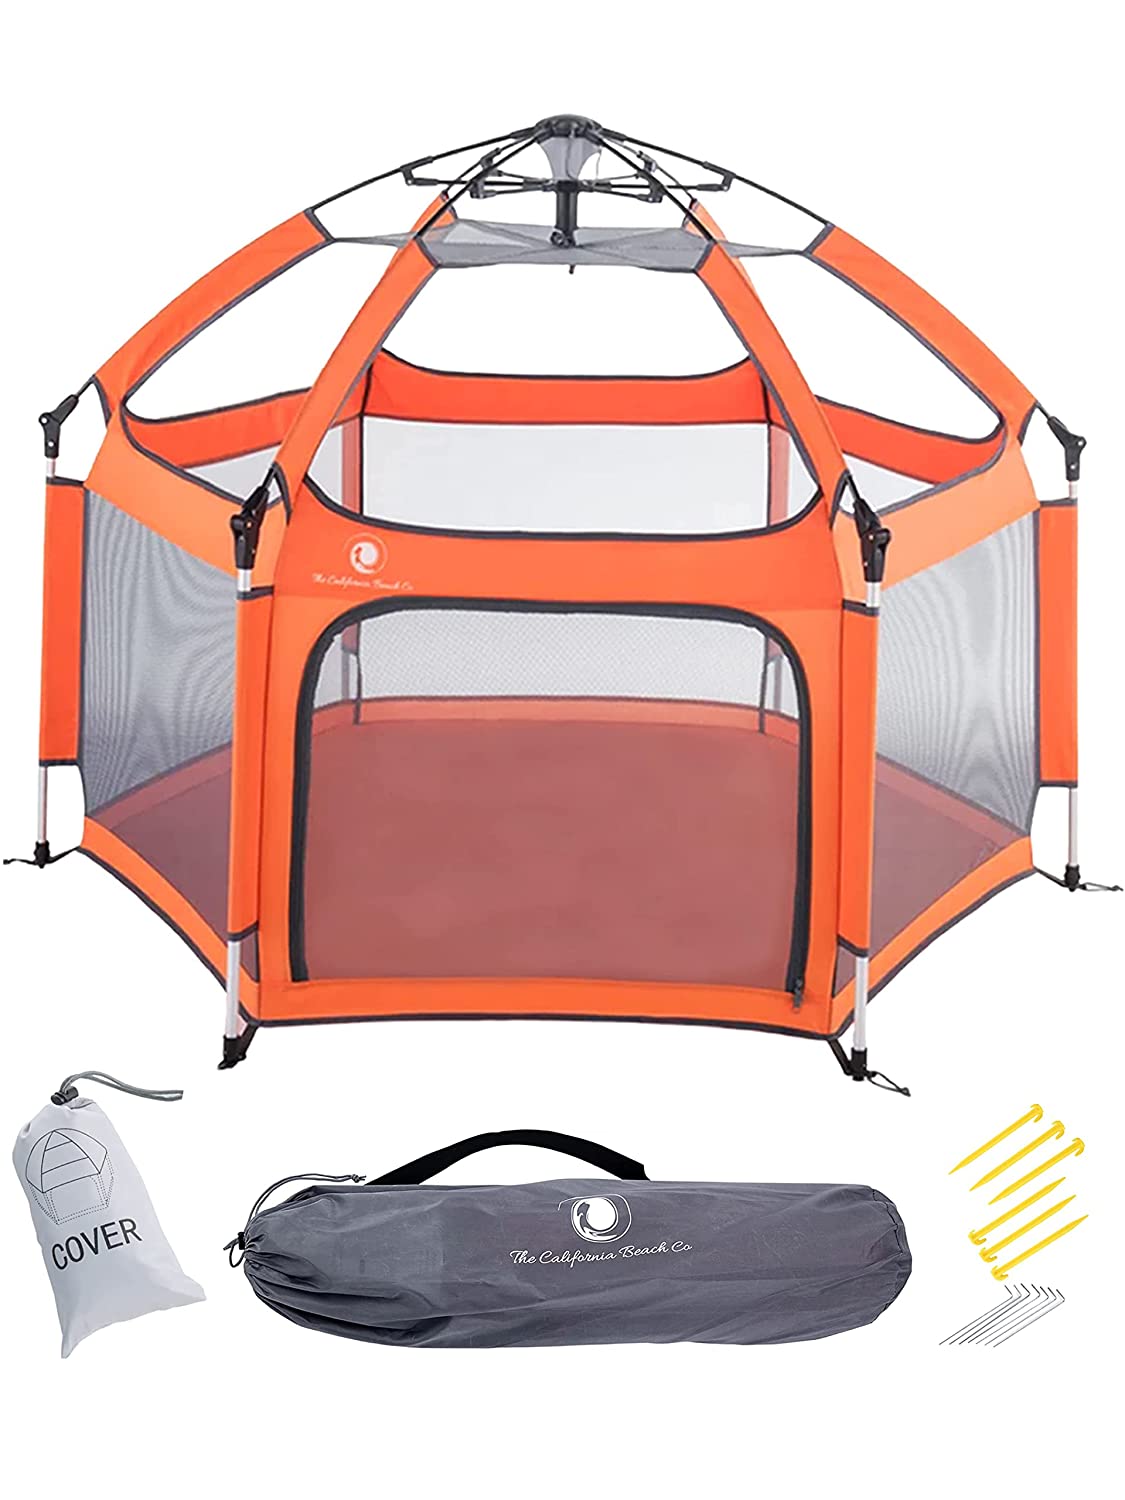 POP 'N GO Premium Outdoor and Indoor Baby Playpen - Portable, Lightweight, Pop Up Pack and Play Toddler Play Yard w/Canopy and Travel Bag - Orange - image 1 of 7